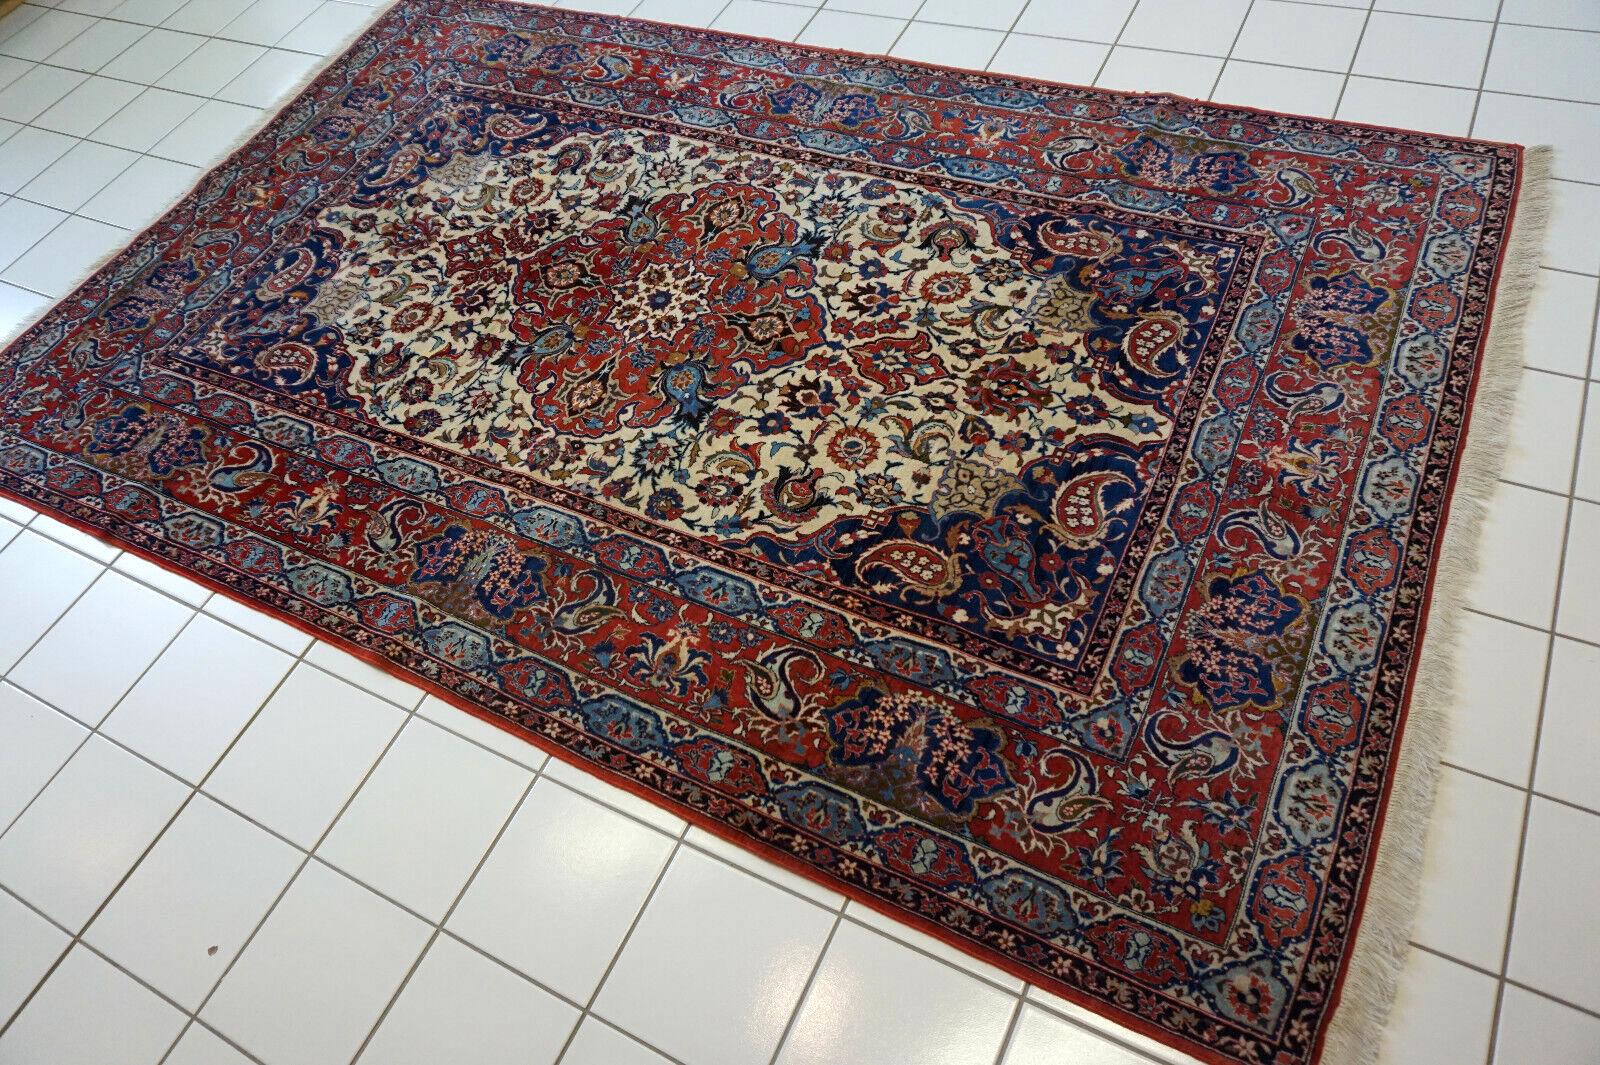 This Handmade Antique Persian Style Isfahan Rug is a remarkable piece of artistry from the 1920s. Let me describe its intricate design and captivating colors based on the image:

Design and Patterns:

The central motif features an elaborate floral